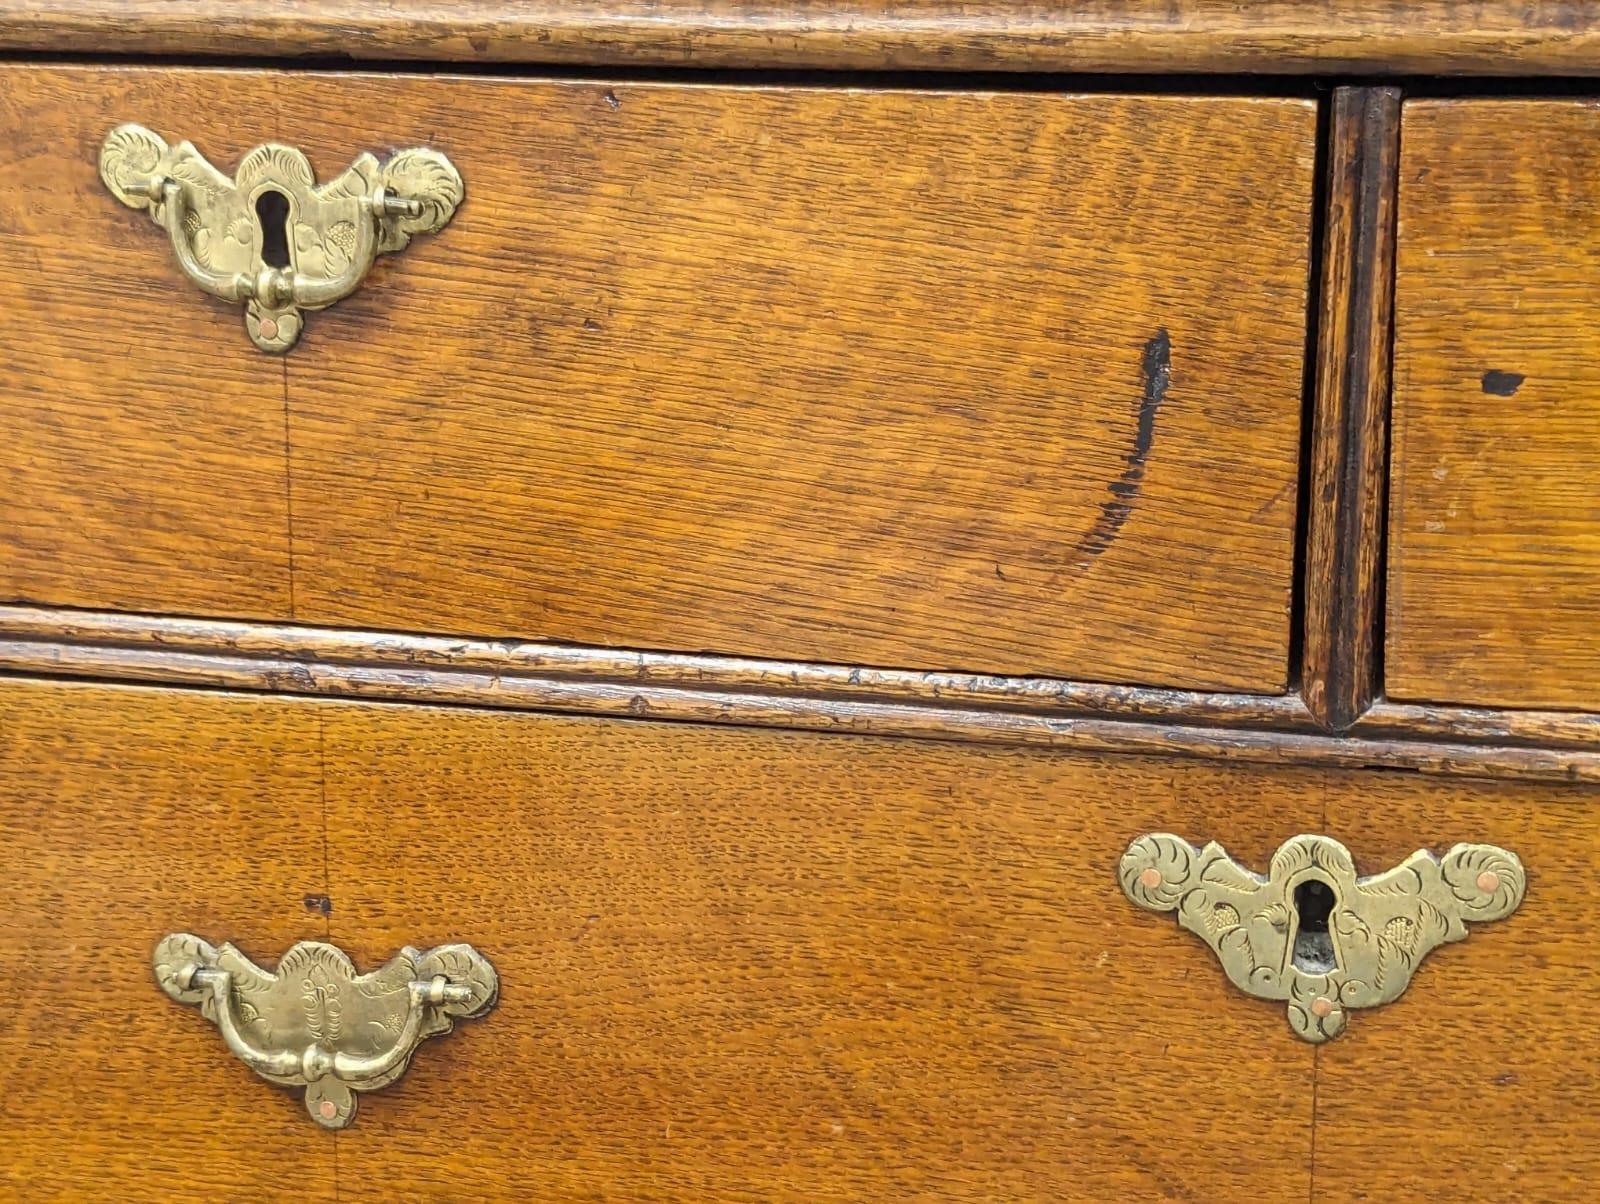 A George II oak chest of drawers with original handles and bracket feet, 94.5cm x 54.5cm x 94.5cm - Image 2 of 8